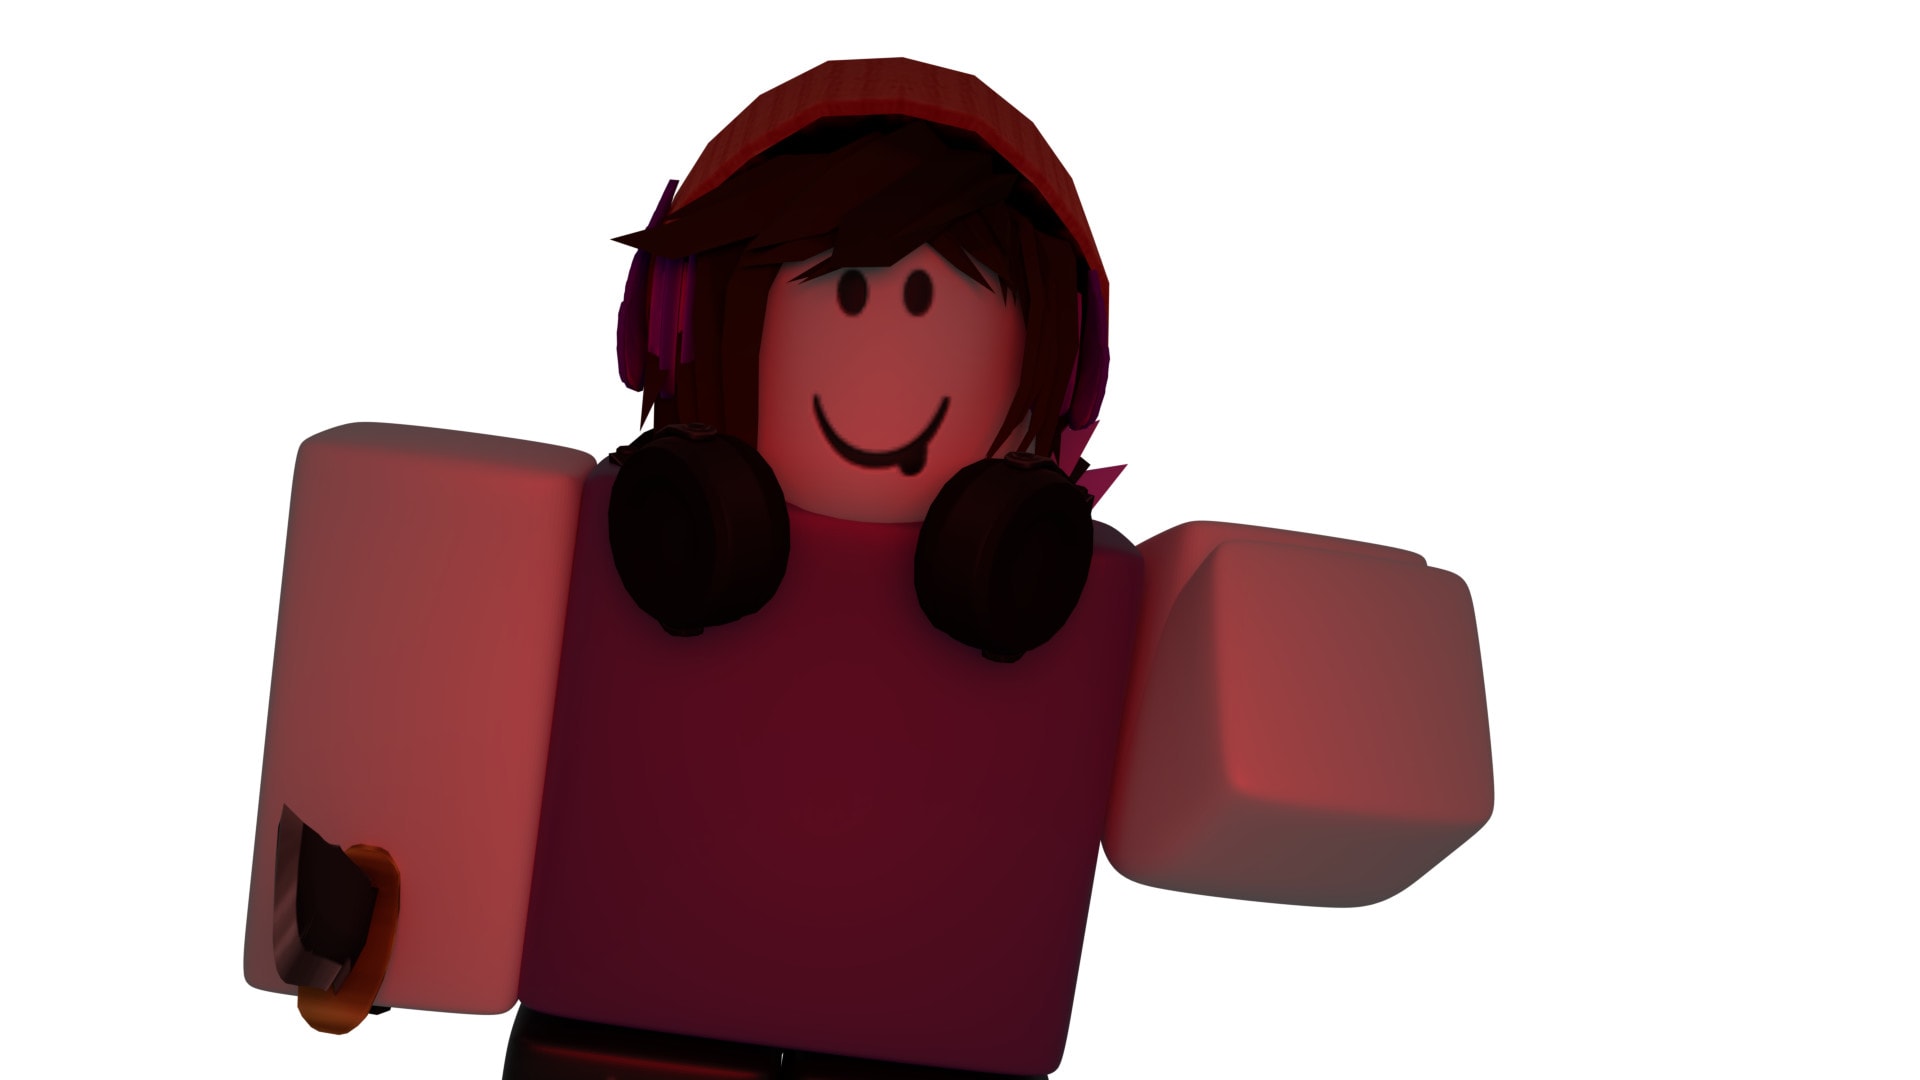 Make a transparent roblox gfx for you by Caisy_rblx